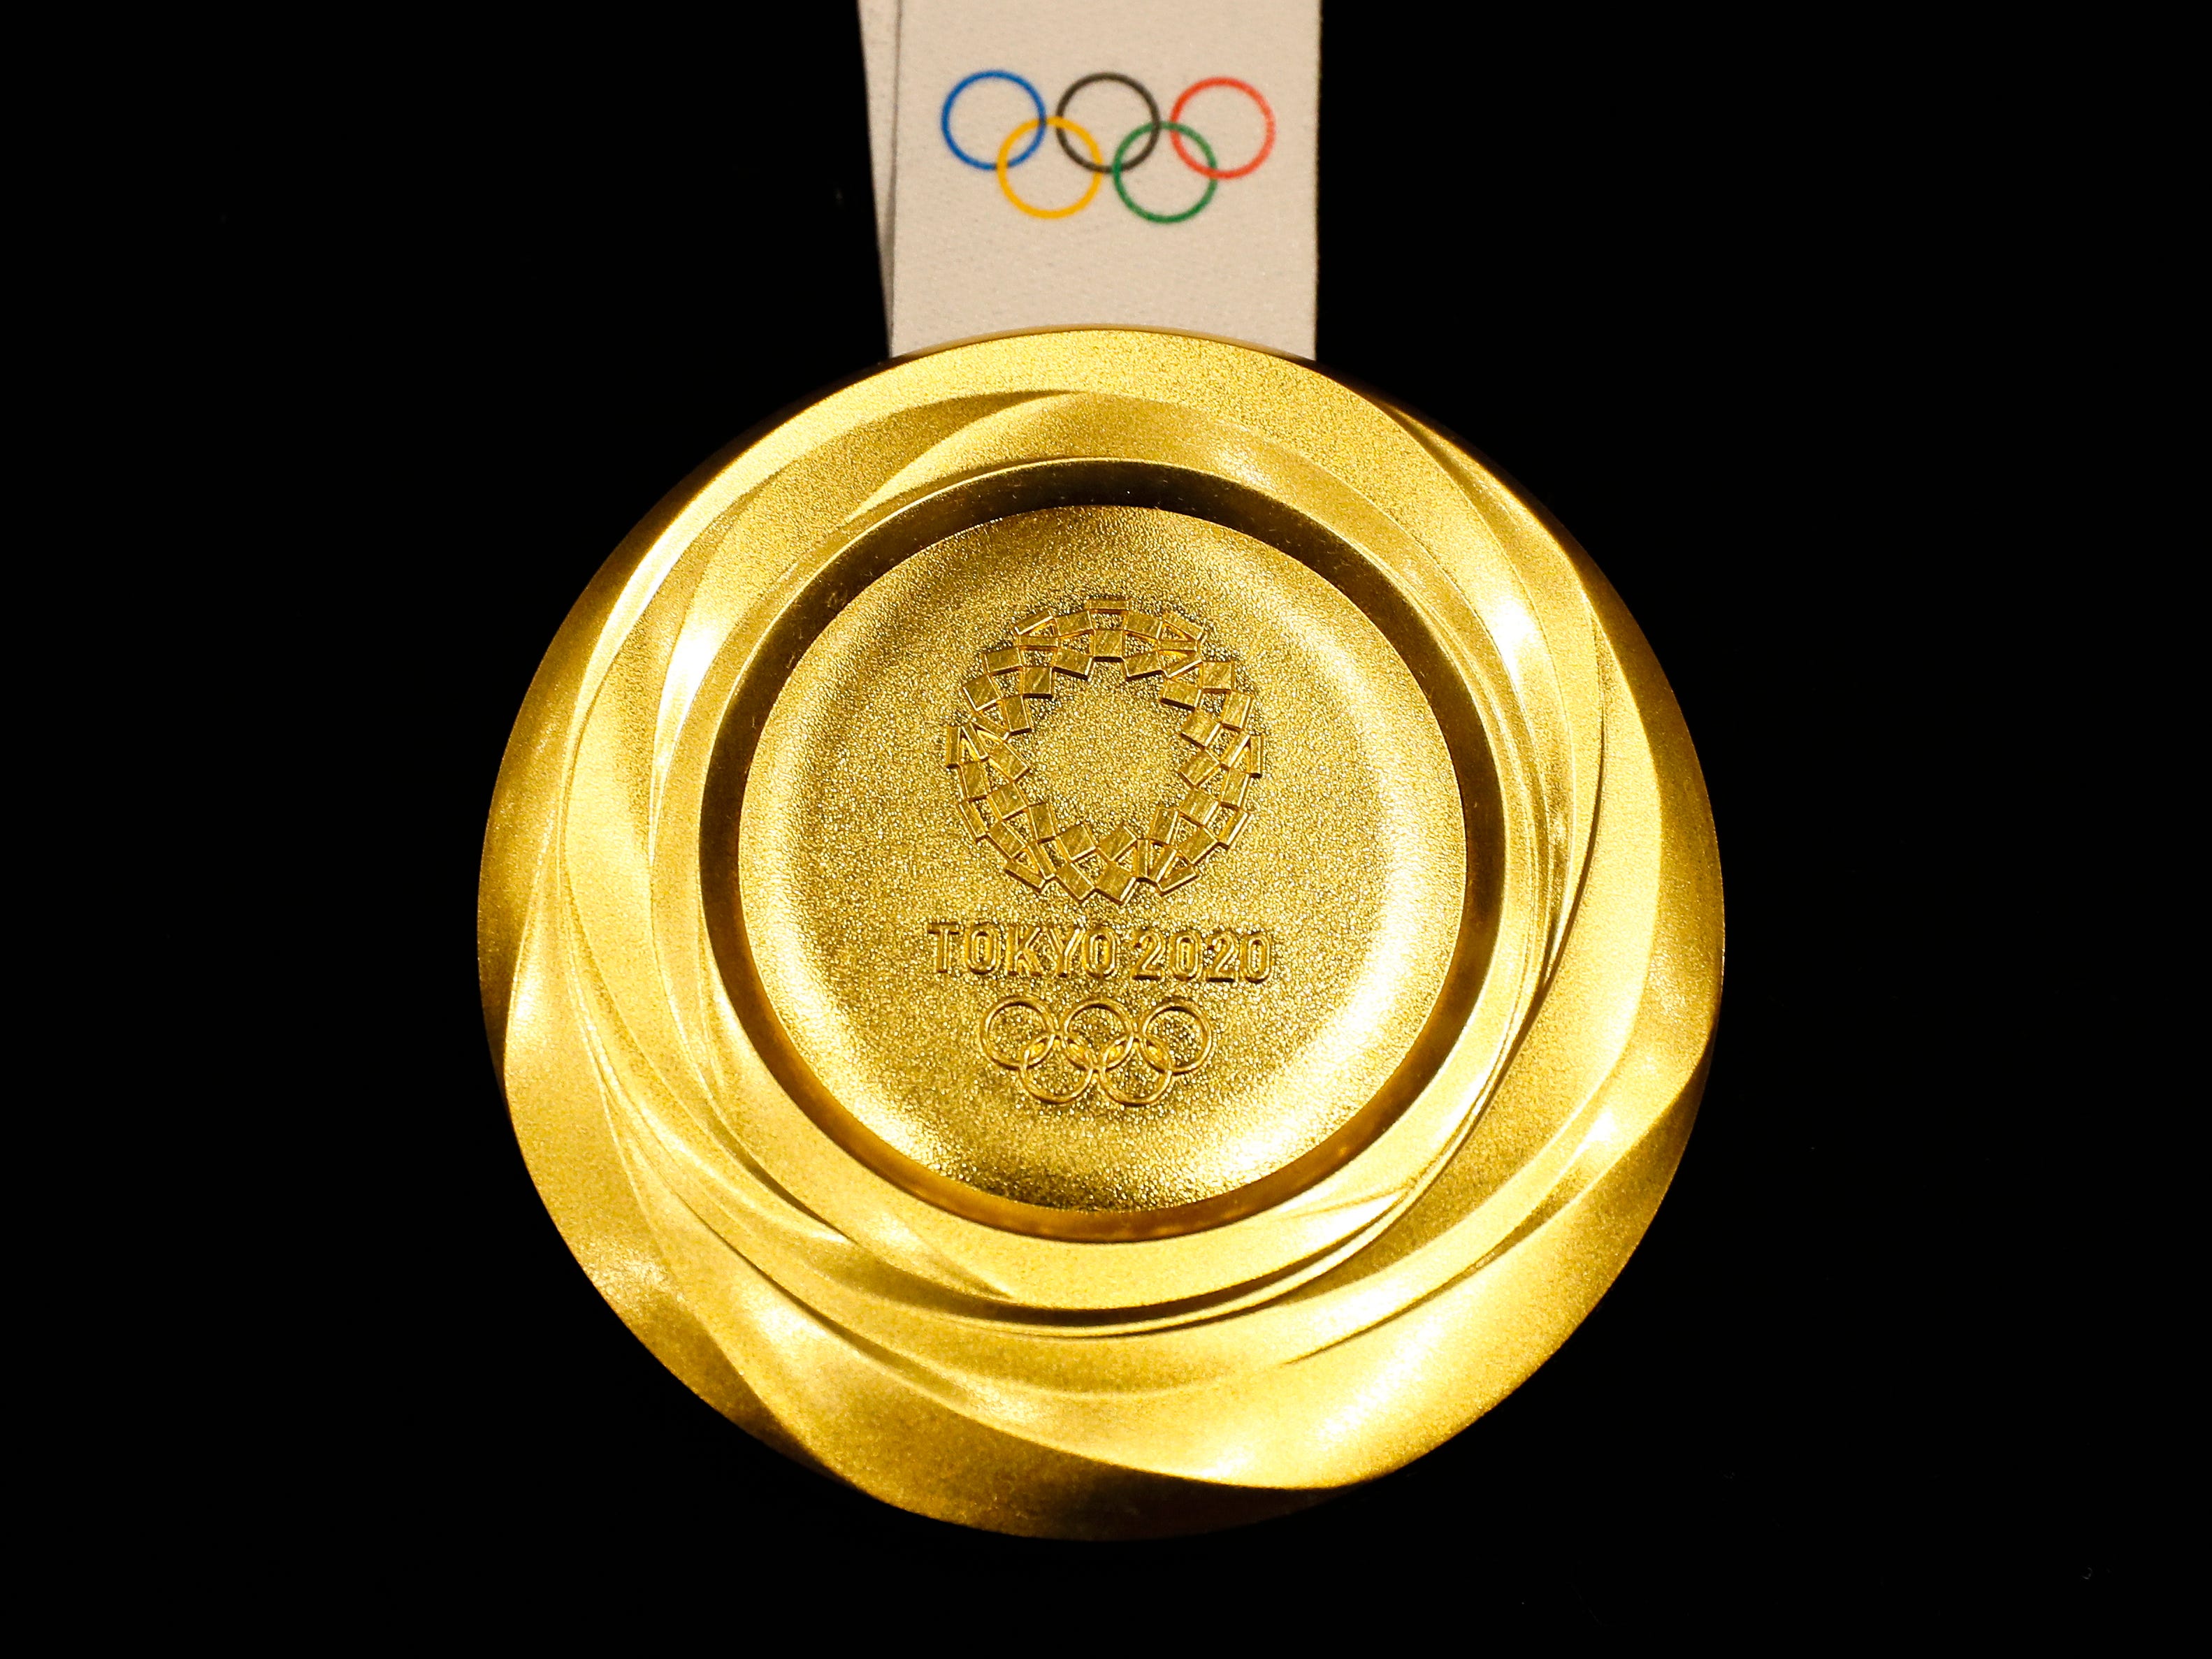 Up-close look at the gold medal for the 2020 Summer Olympics.